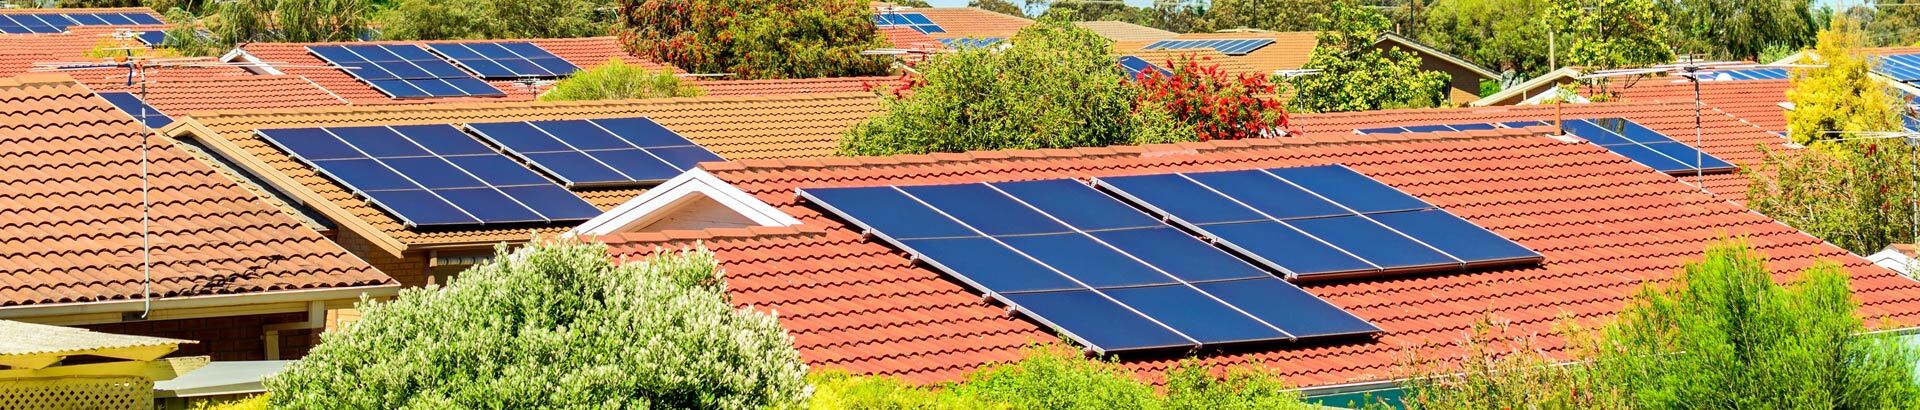 How to protect your solar panels from birds